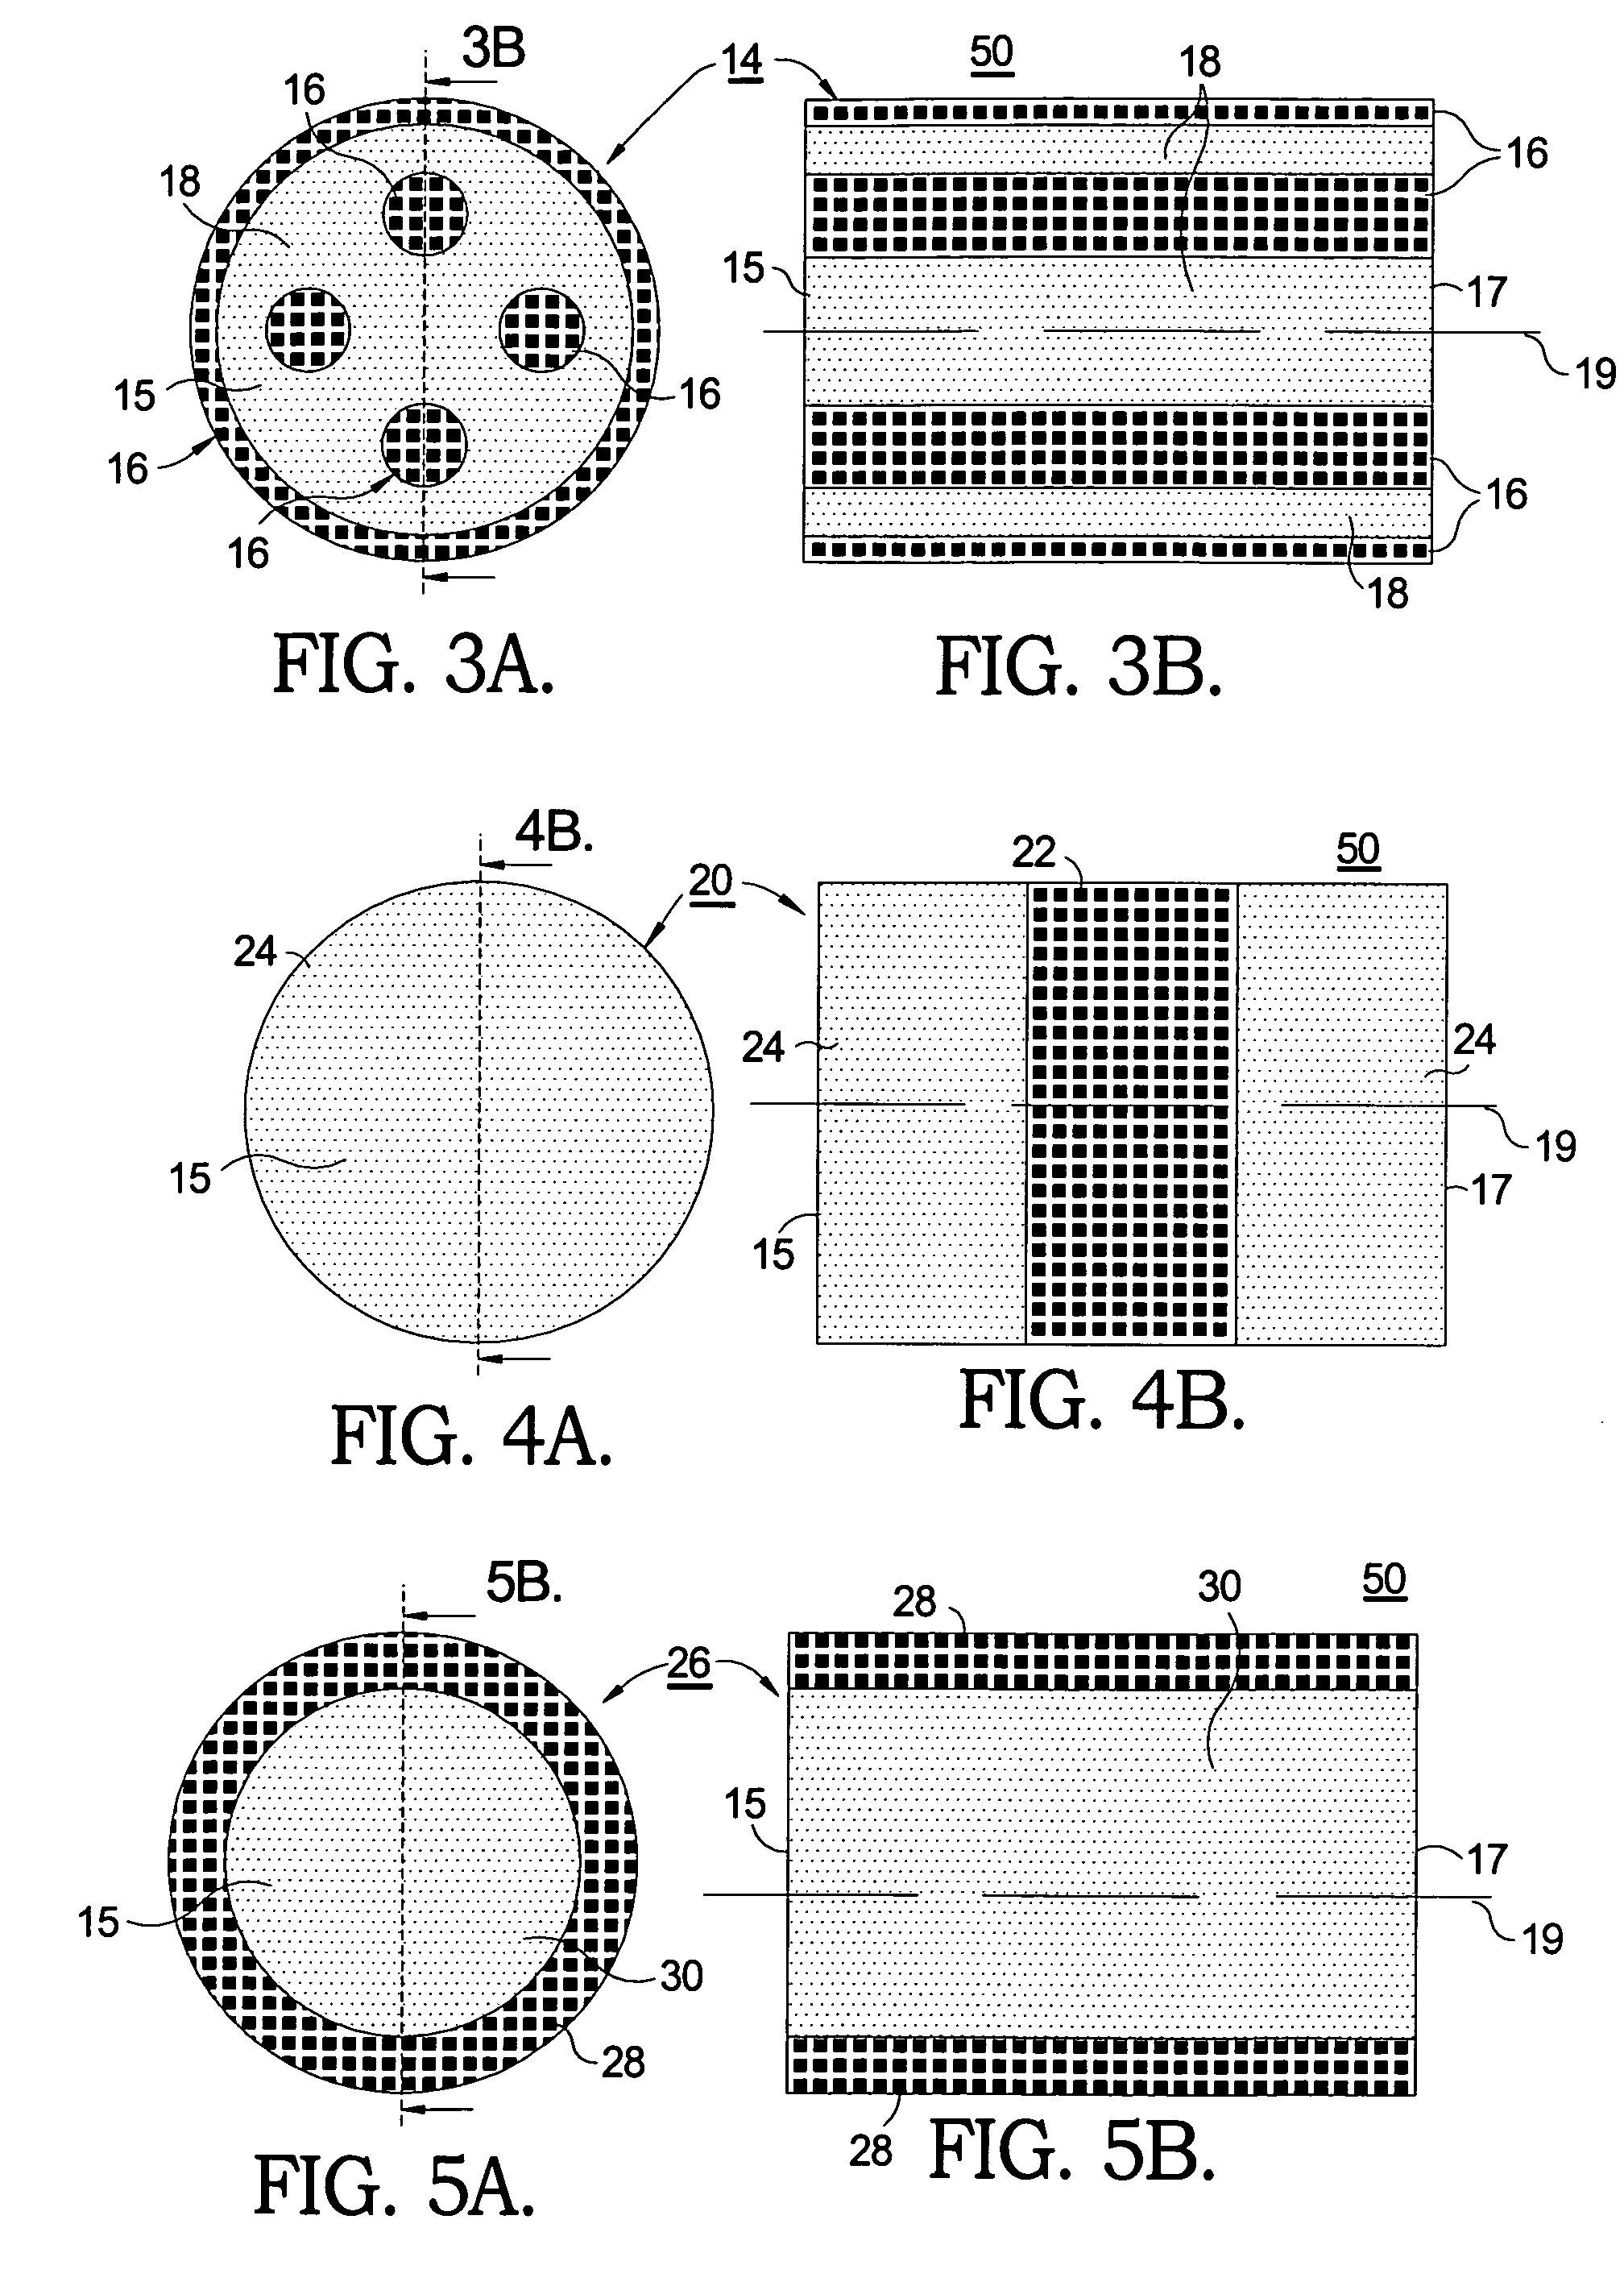 Hydrocarbon reformer substrate having a graded structure for thermal control